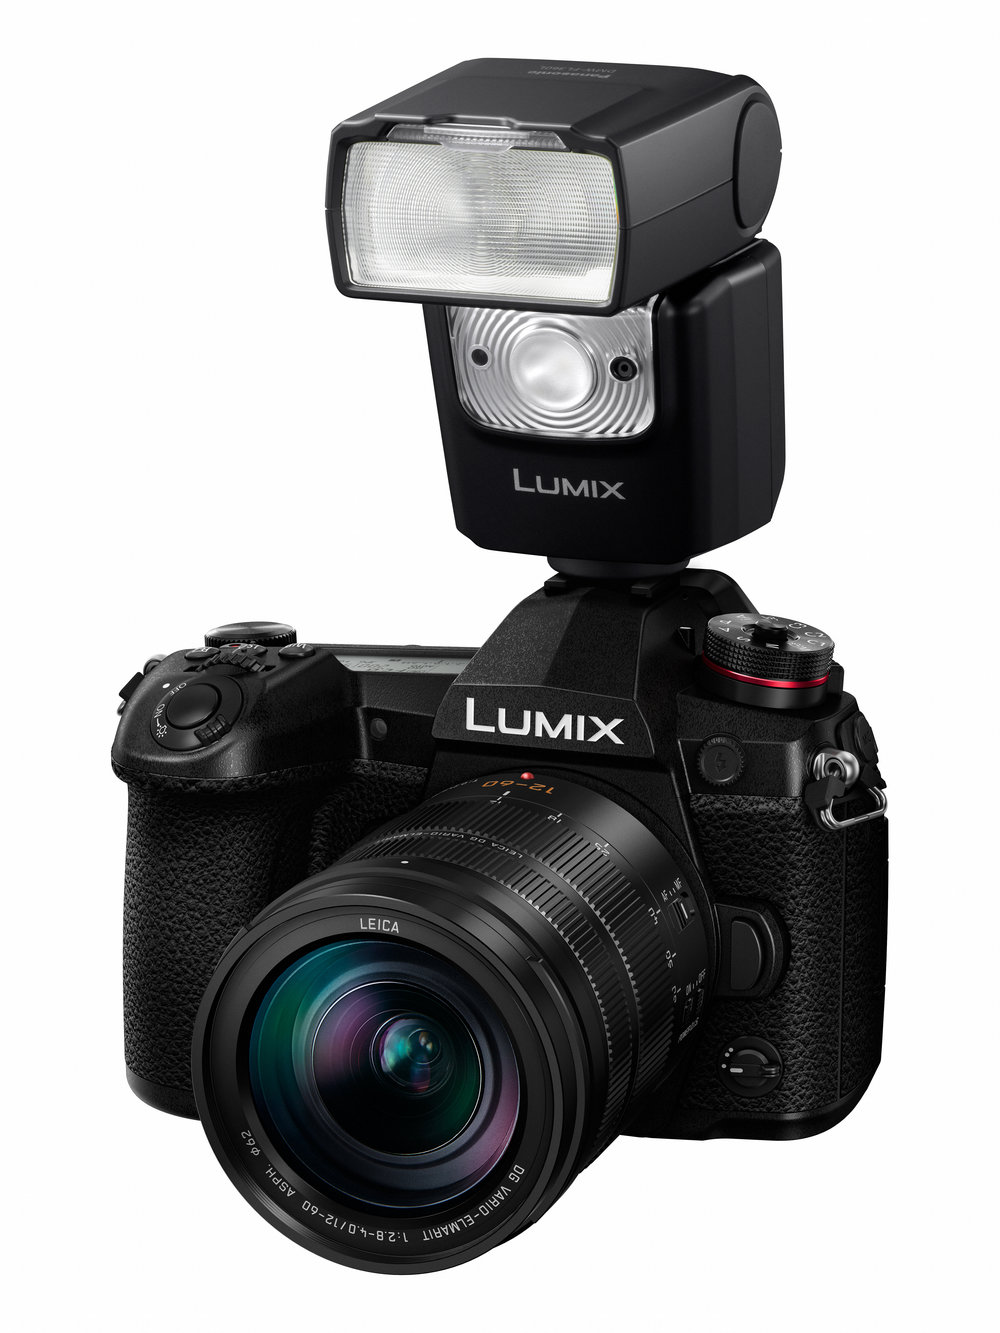   The Lumix G9 is no shrinking violet. It is a great camera and certainly one of the best micro four-thirds shooters you can buy. But, let’s face it, you can get a full-frame mirrorless than is smaller (the Sony A7III to name but one). The G9 has the advantage over full-frame when it comes to lens architecture, but even here we have seen feature bloat over the years  